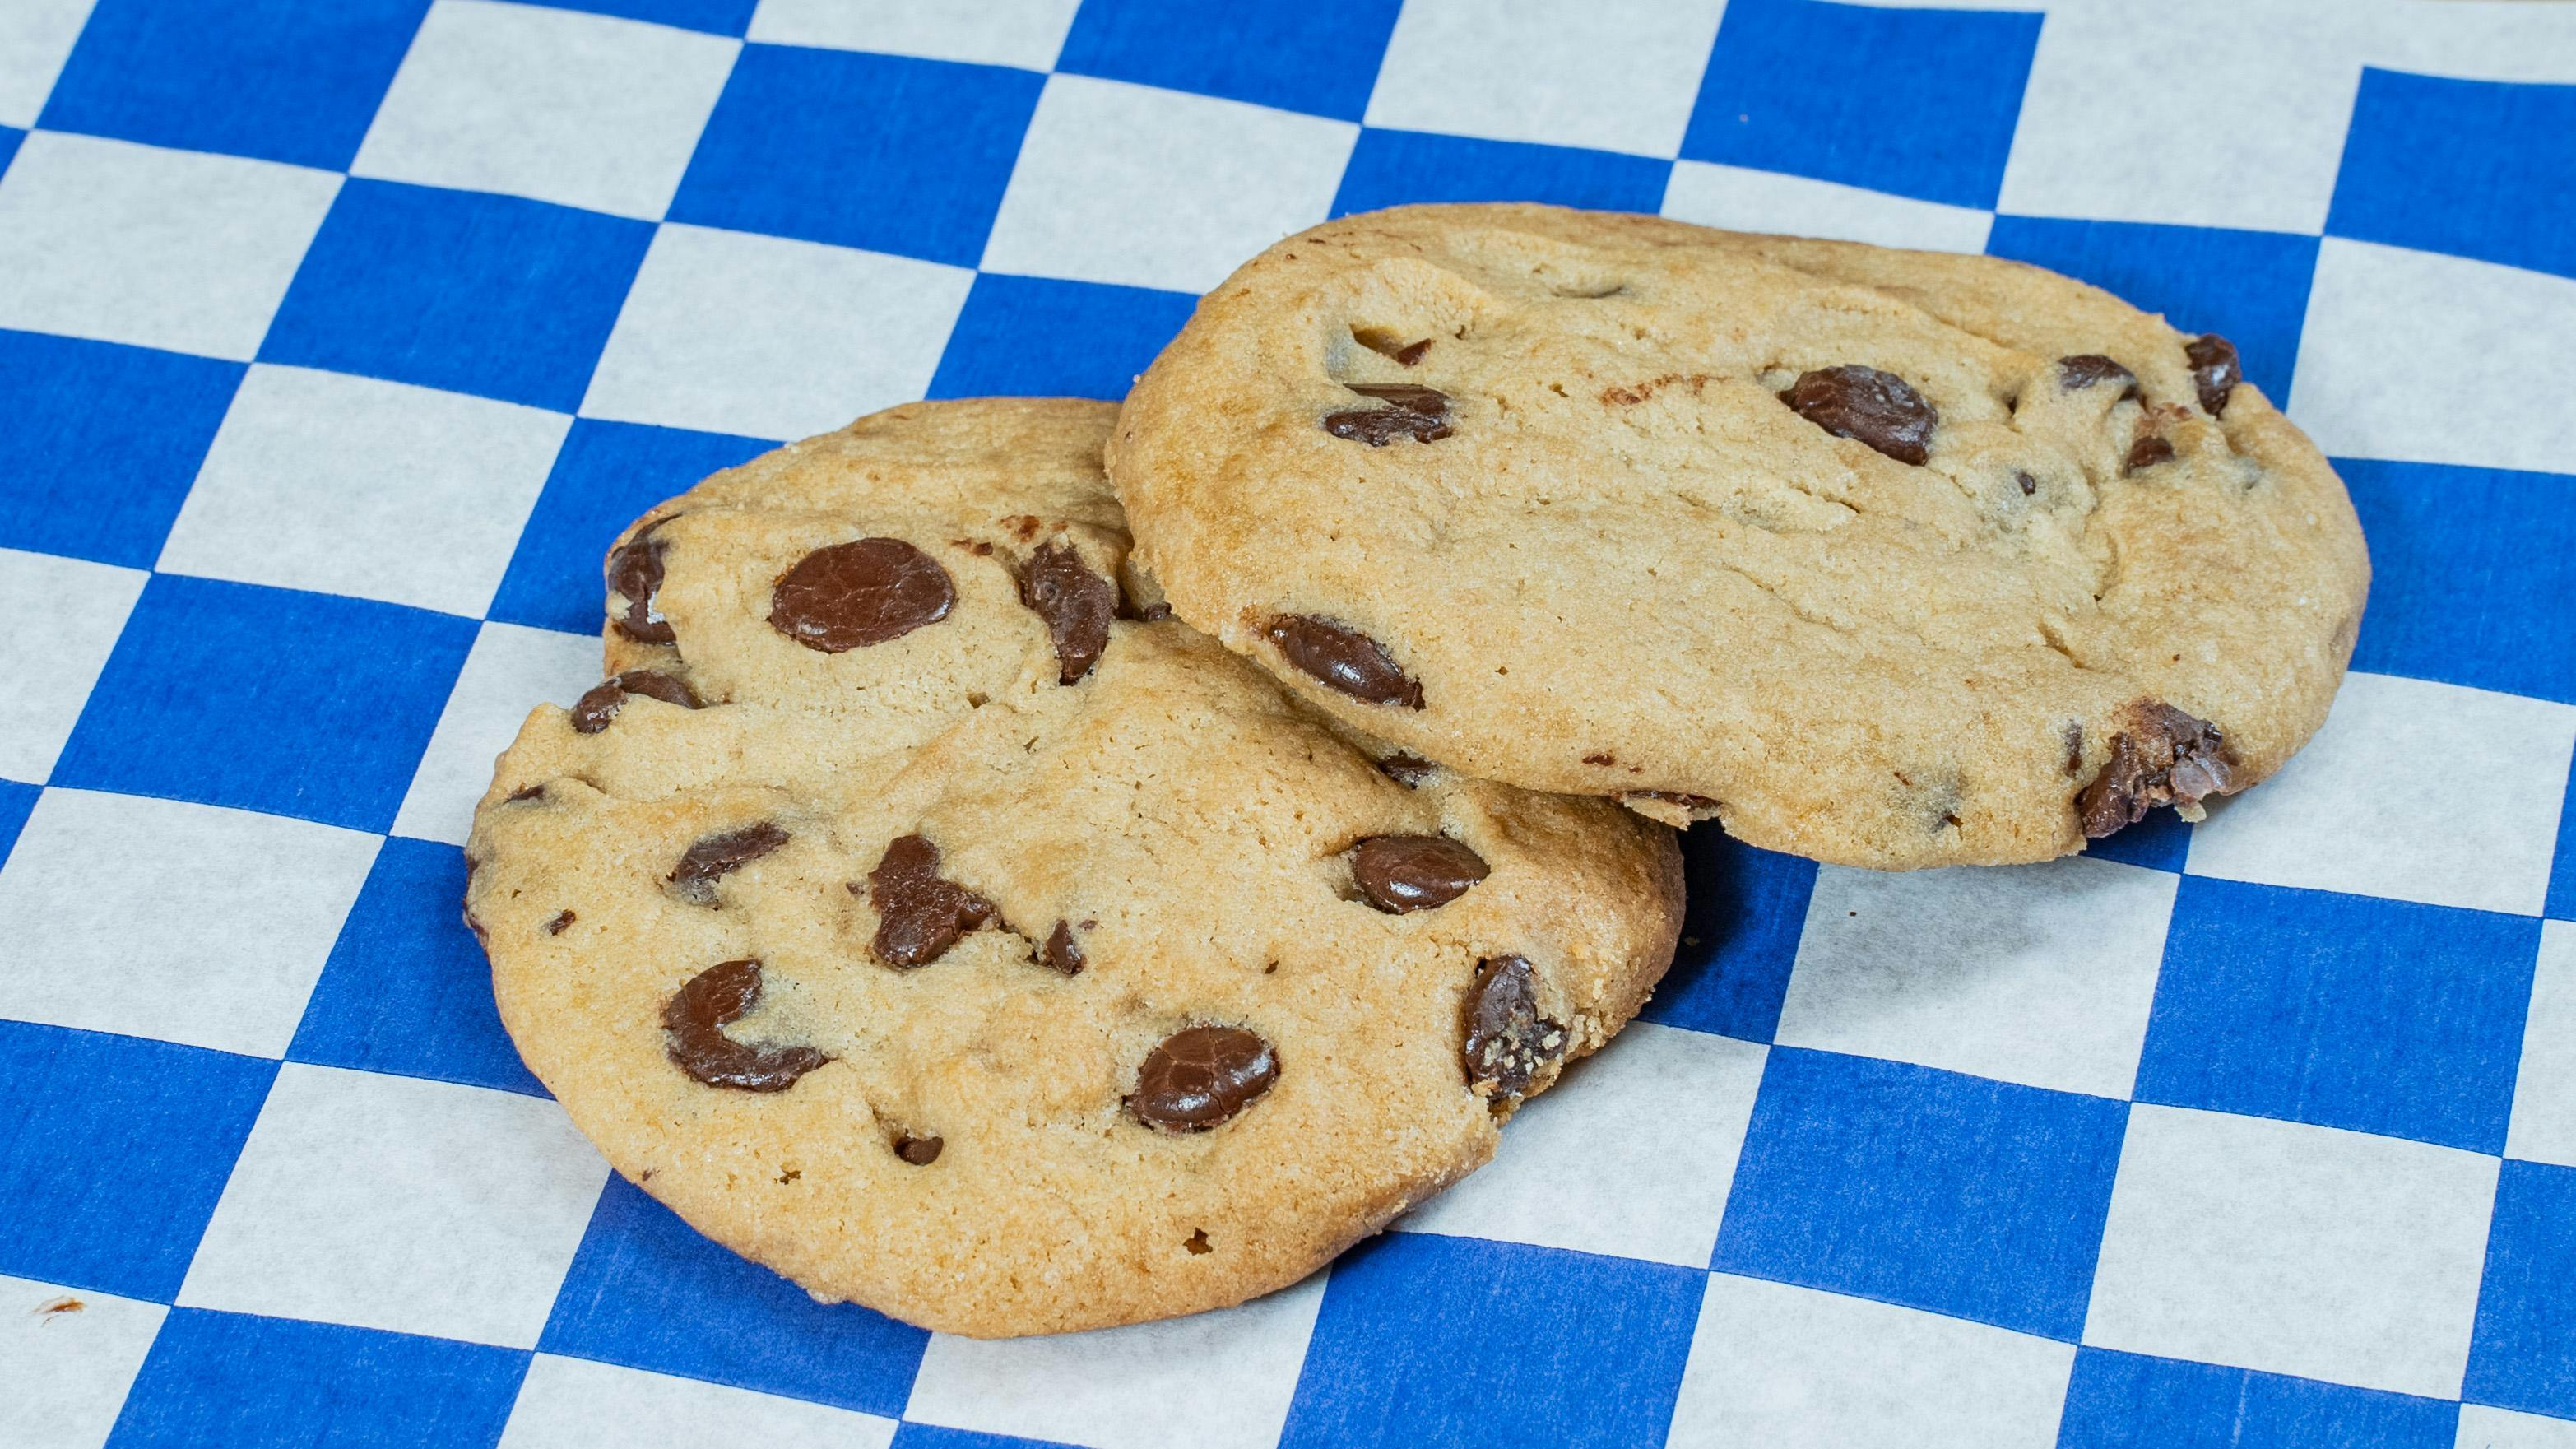 Chocolate Chip Cookies from Austin Salad Company - East 6th St in Austin, TX